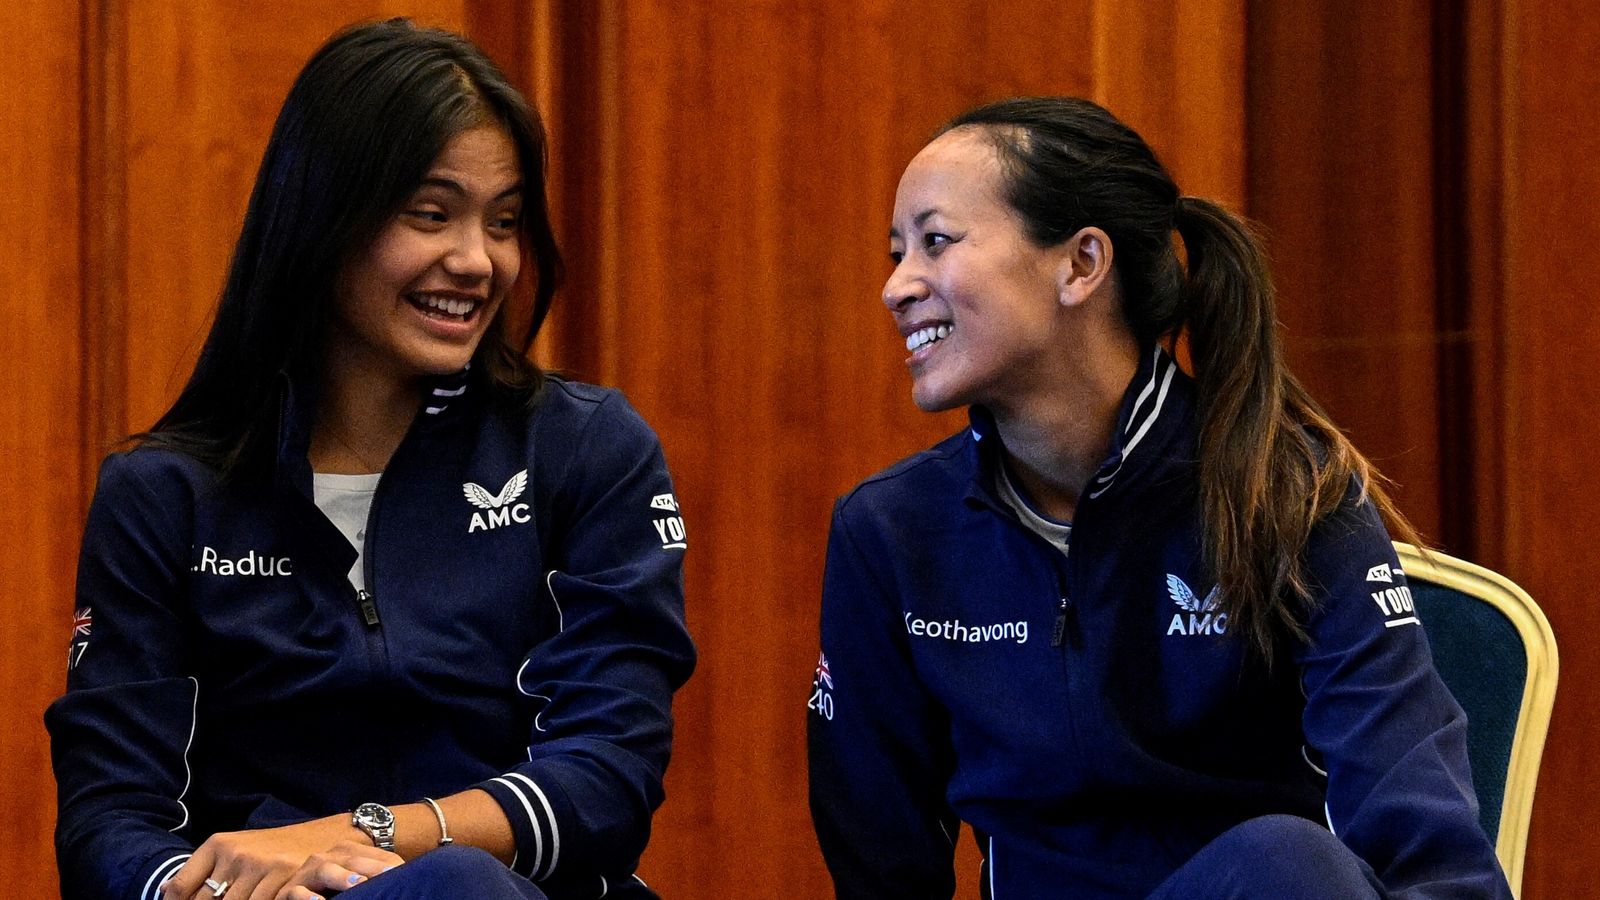 anne-keothavong-excited-emma-raducanu-will-be-part-of-team-gb